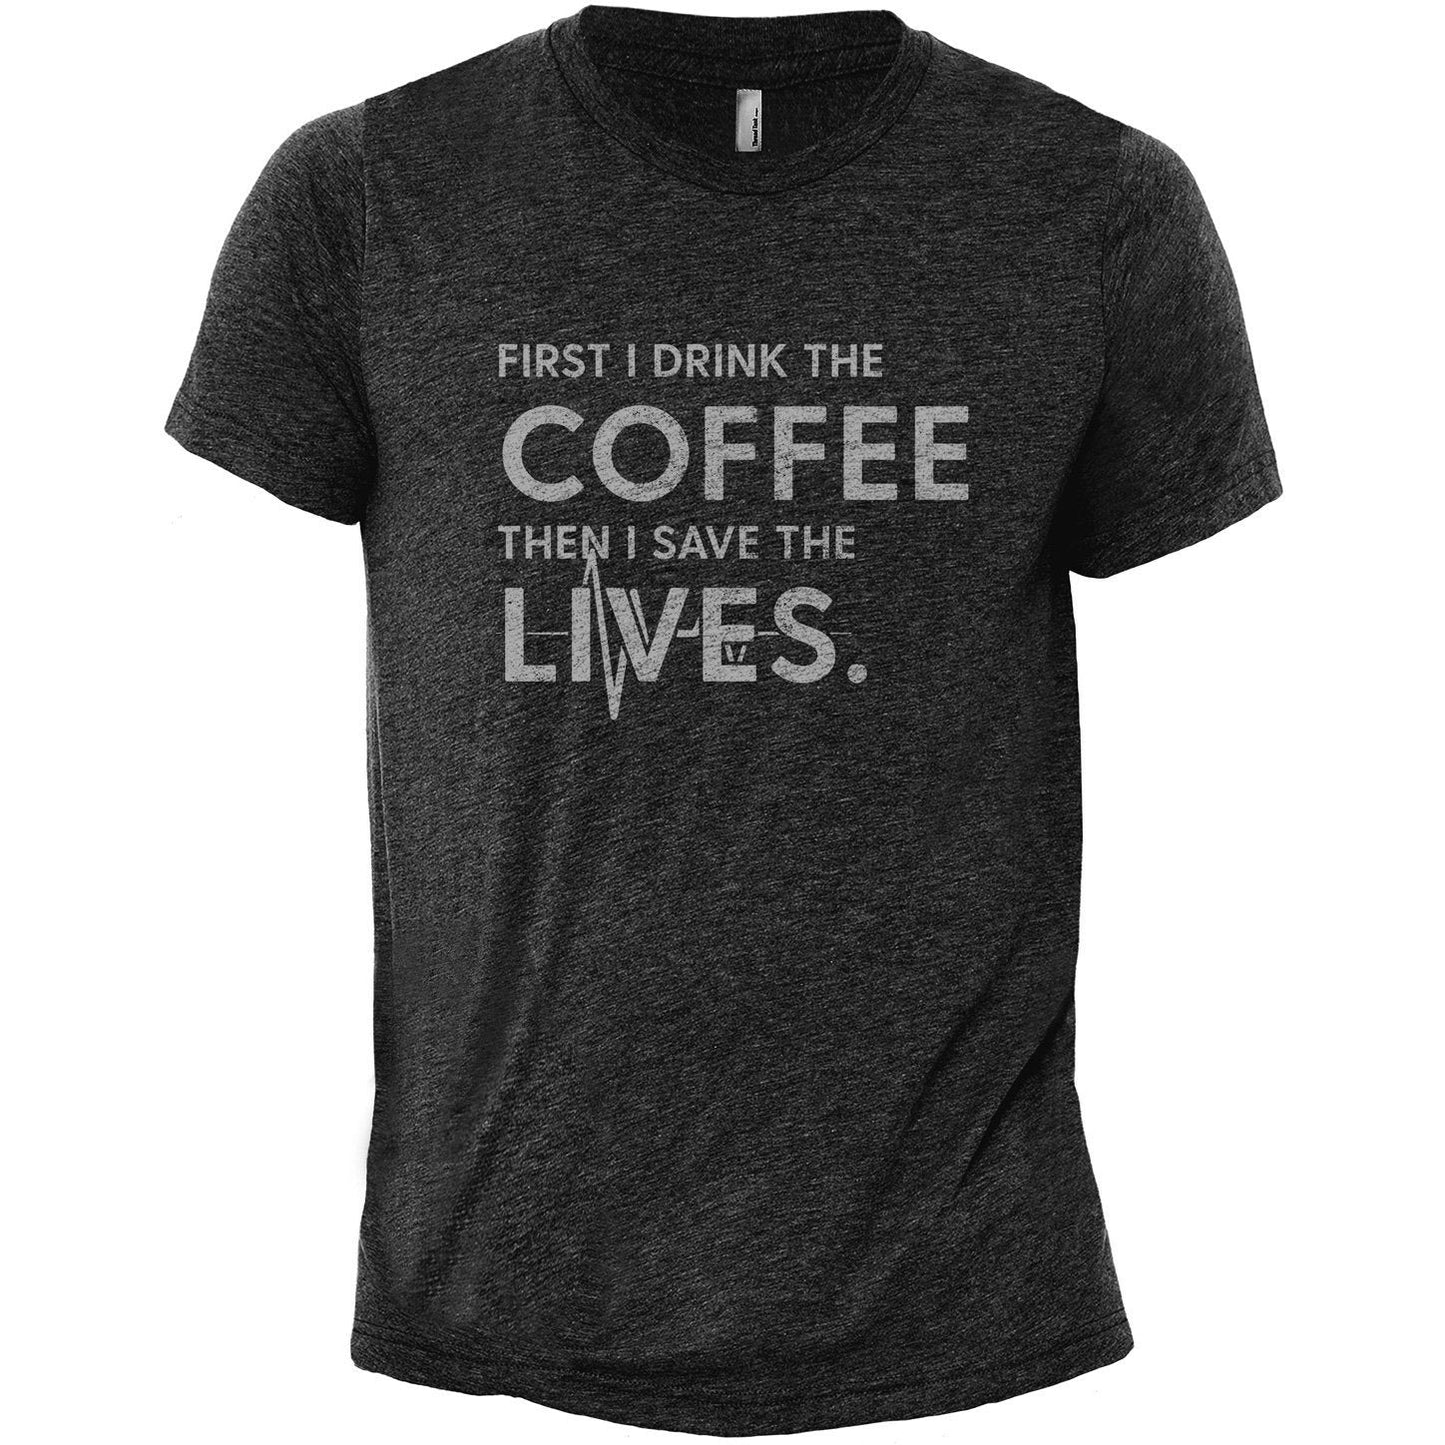 First I Drink The Coffee Then I Save The Lives Charcoal Printed Graphic Men's Crew T-Shirt Tee